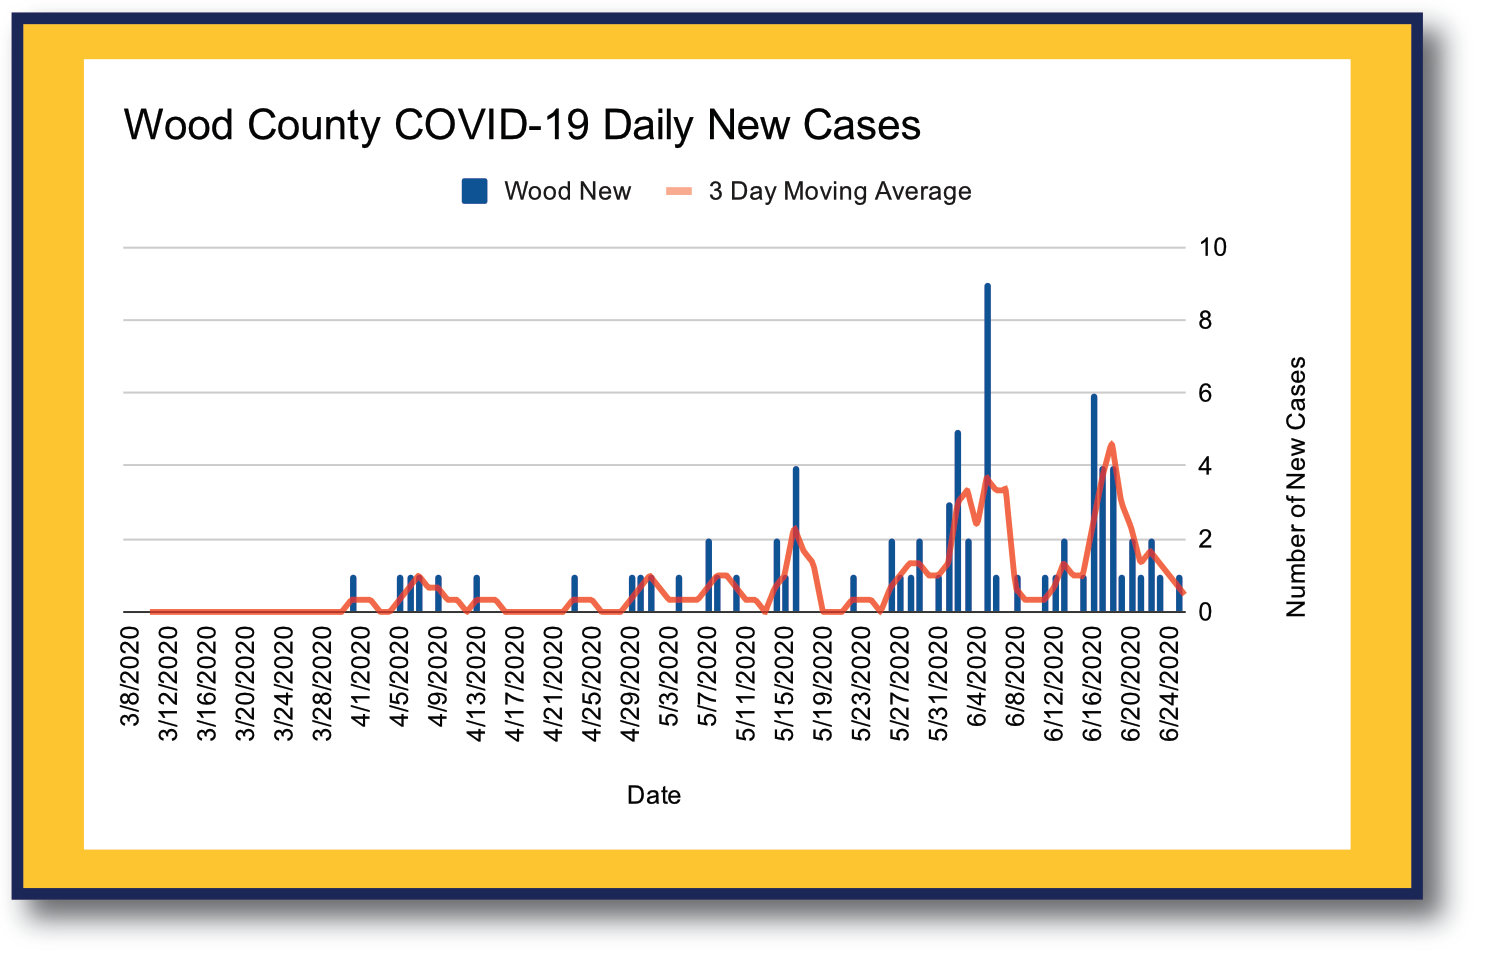 Blue bars indicate new daily cases reported by Northeast Texas Public Health District. Red line shows a 3-day moving average of those cases.